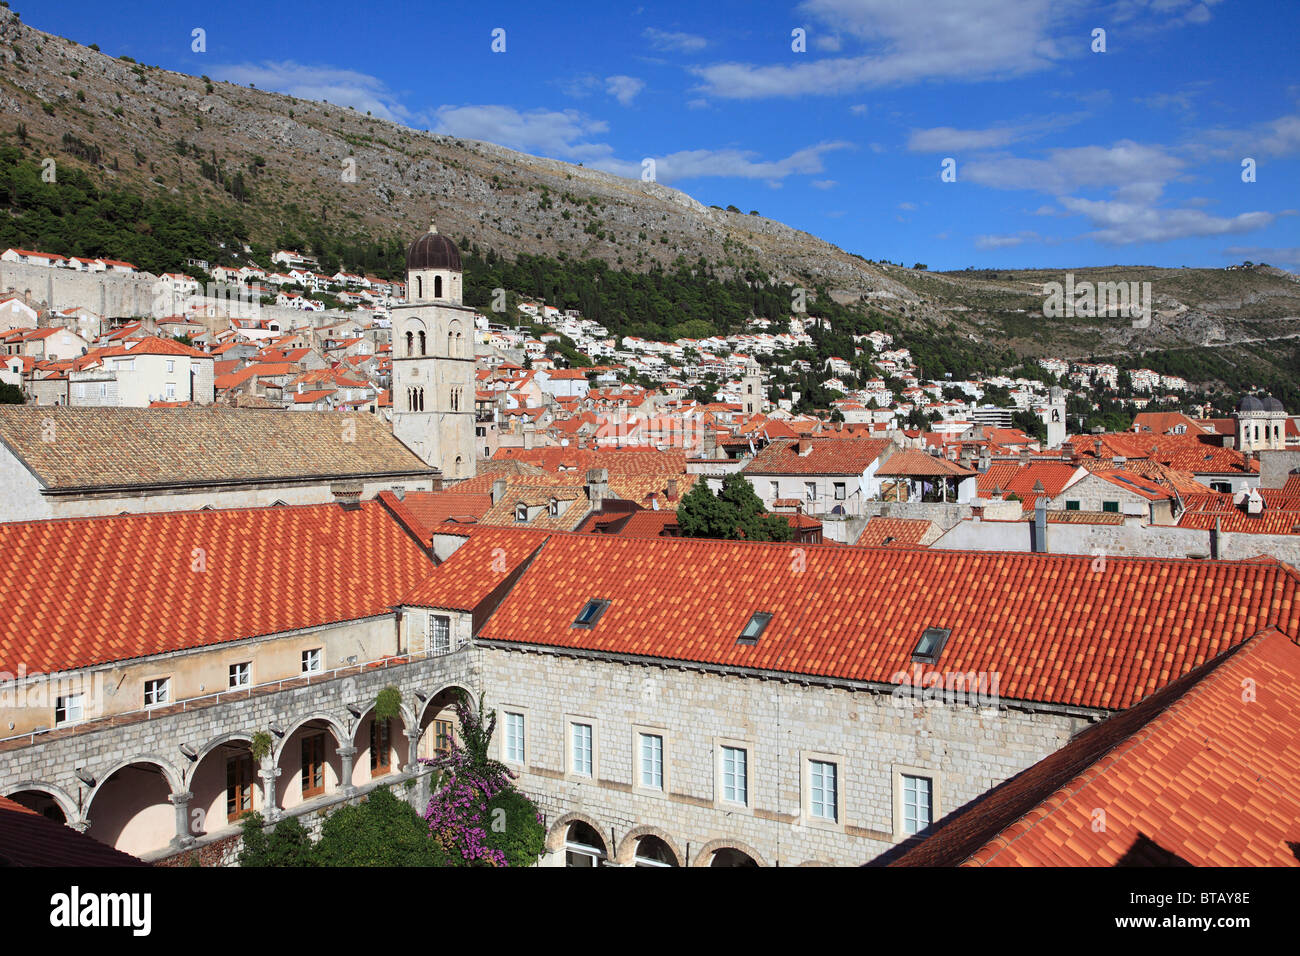 Croatia, Dubrovnik, St Claire's Convent, Franciscan Monastery, general view, Stock Photo